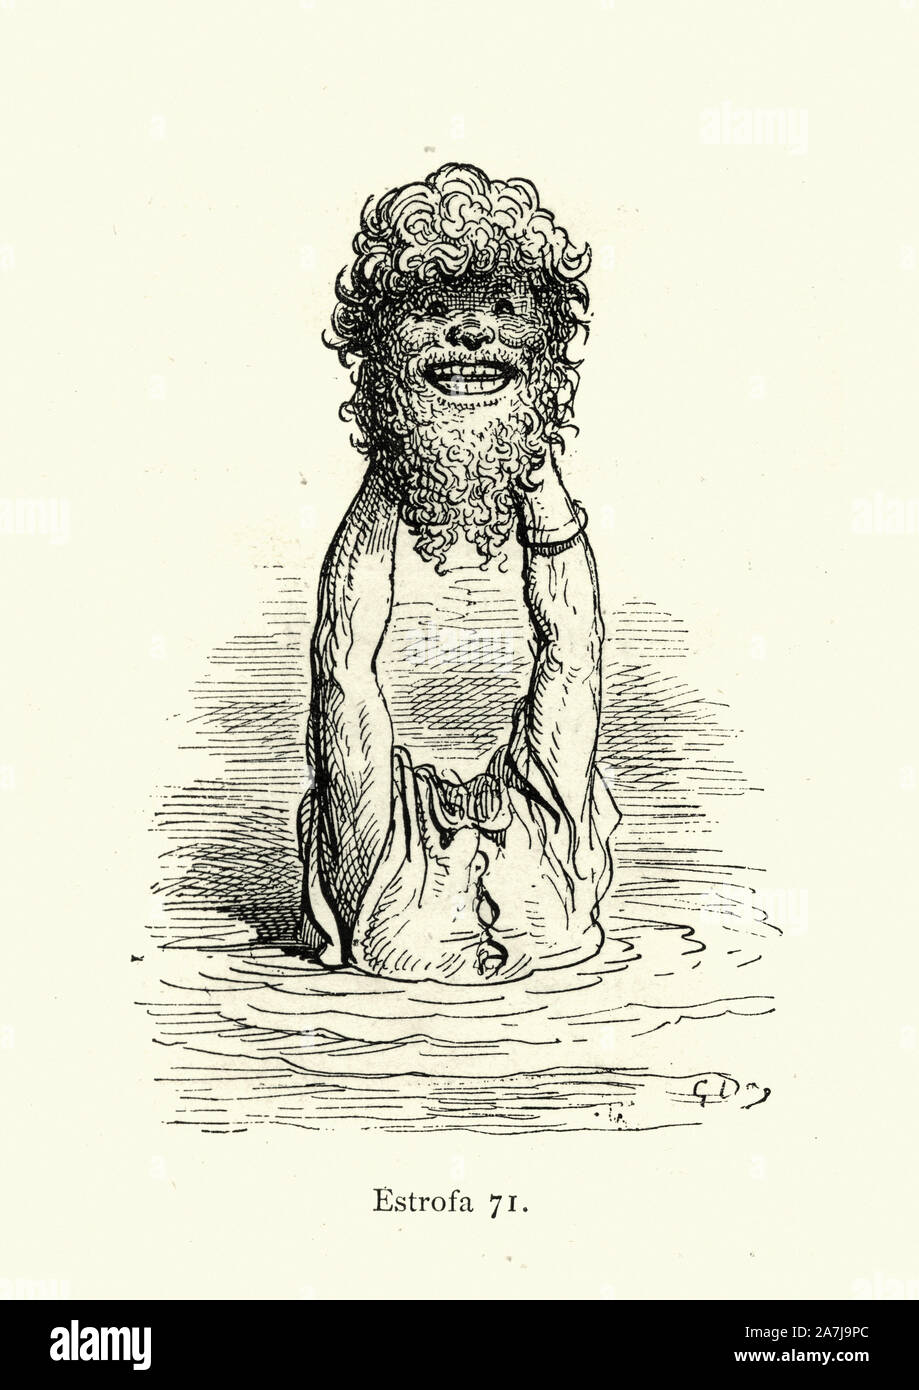 Vintage illustration from the story Orlando Furioso. Horror, Grinning headless giant. Orlando Furioso (The Frenzy of Orlando) an Italian epic poem by Ludovico Ariosto, illustrated by Gustave Dore. The story is also a chivalric romance which stemmed from a tradition beginning in the late Middle Ages. Stock Photo